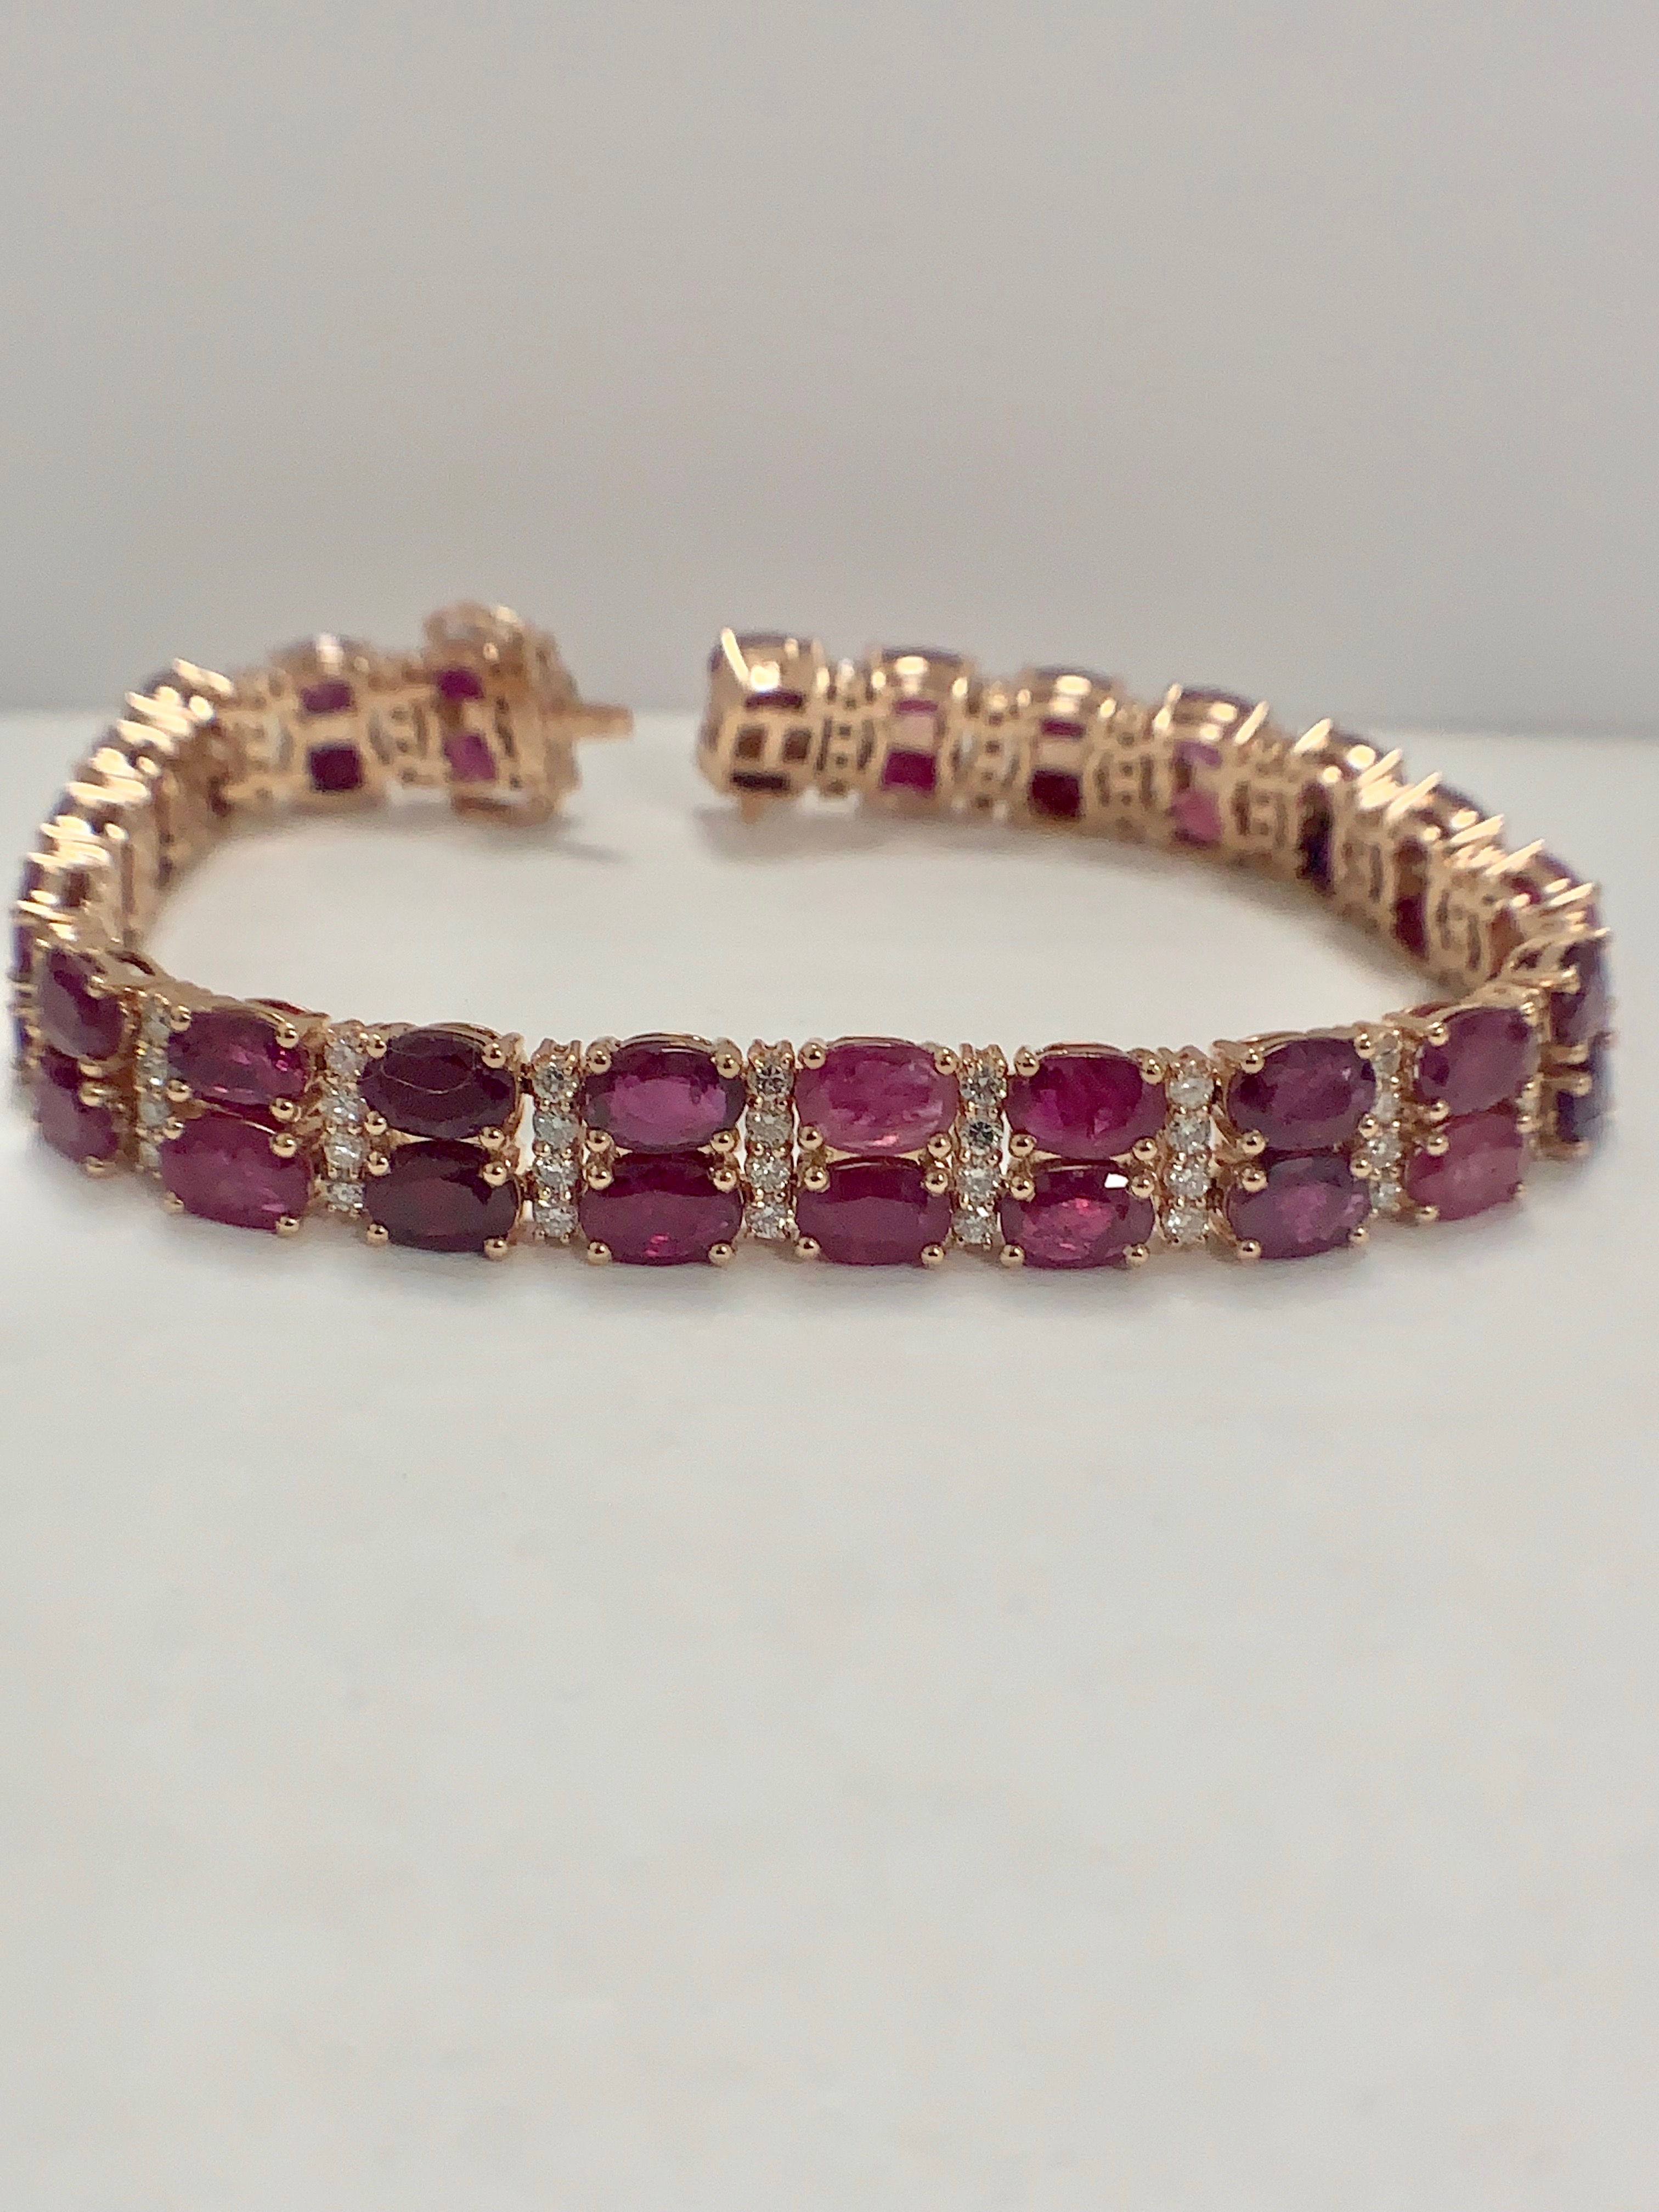 14ct Rose Gold Ruby and Diamond double row bracelet - Image 3 of 16